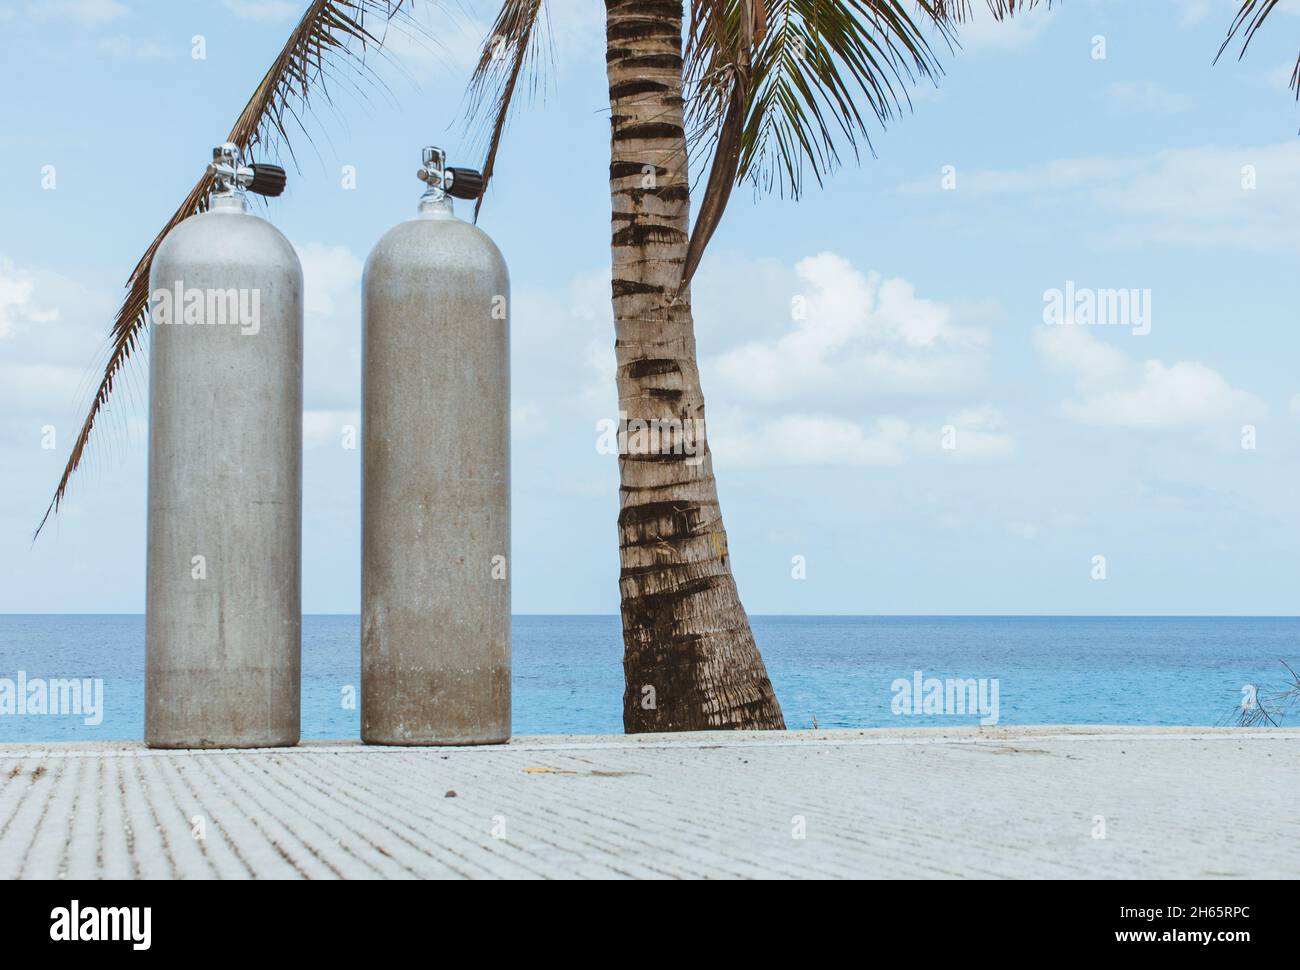 Two scuba diving tanks on road by palm tree and ocean Stock Photo